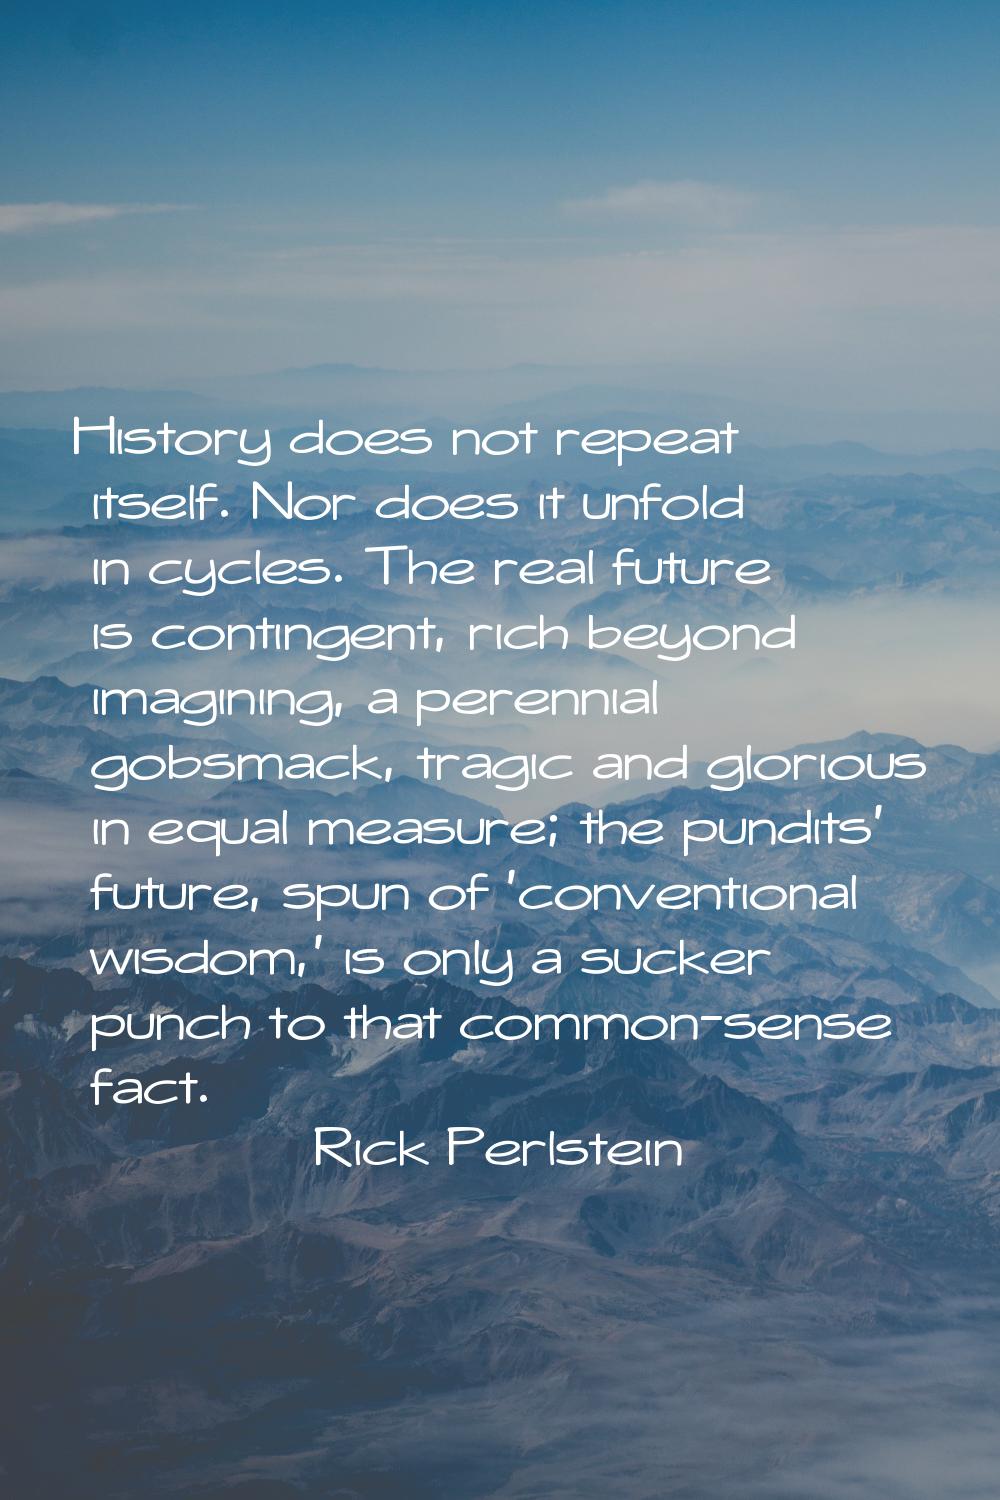 History does not repeat itself. Nor does it unfold in cycles. The real future is contingent, rich b